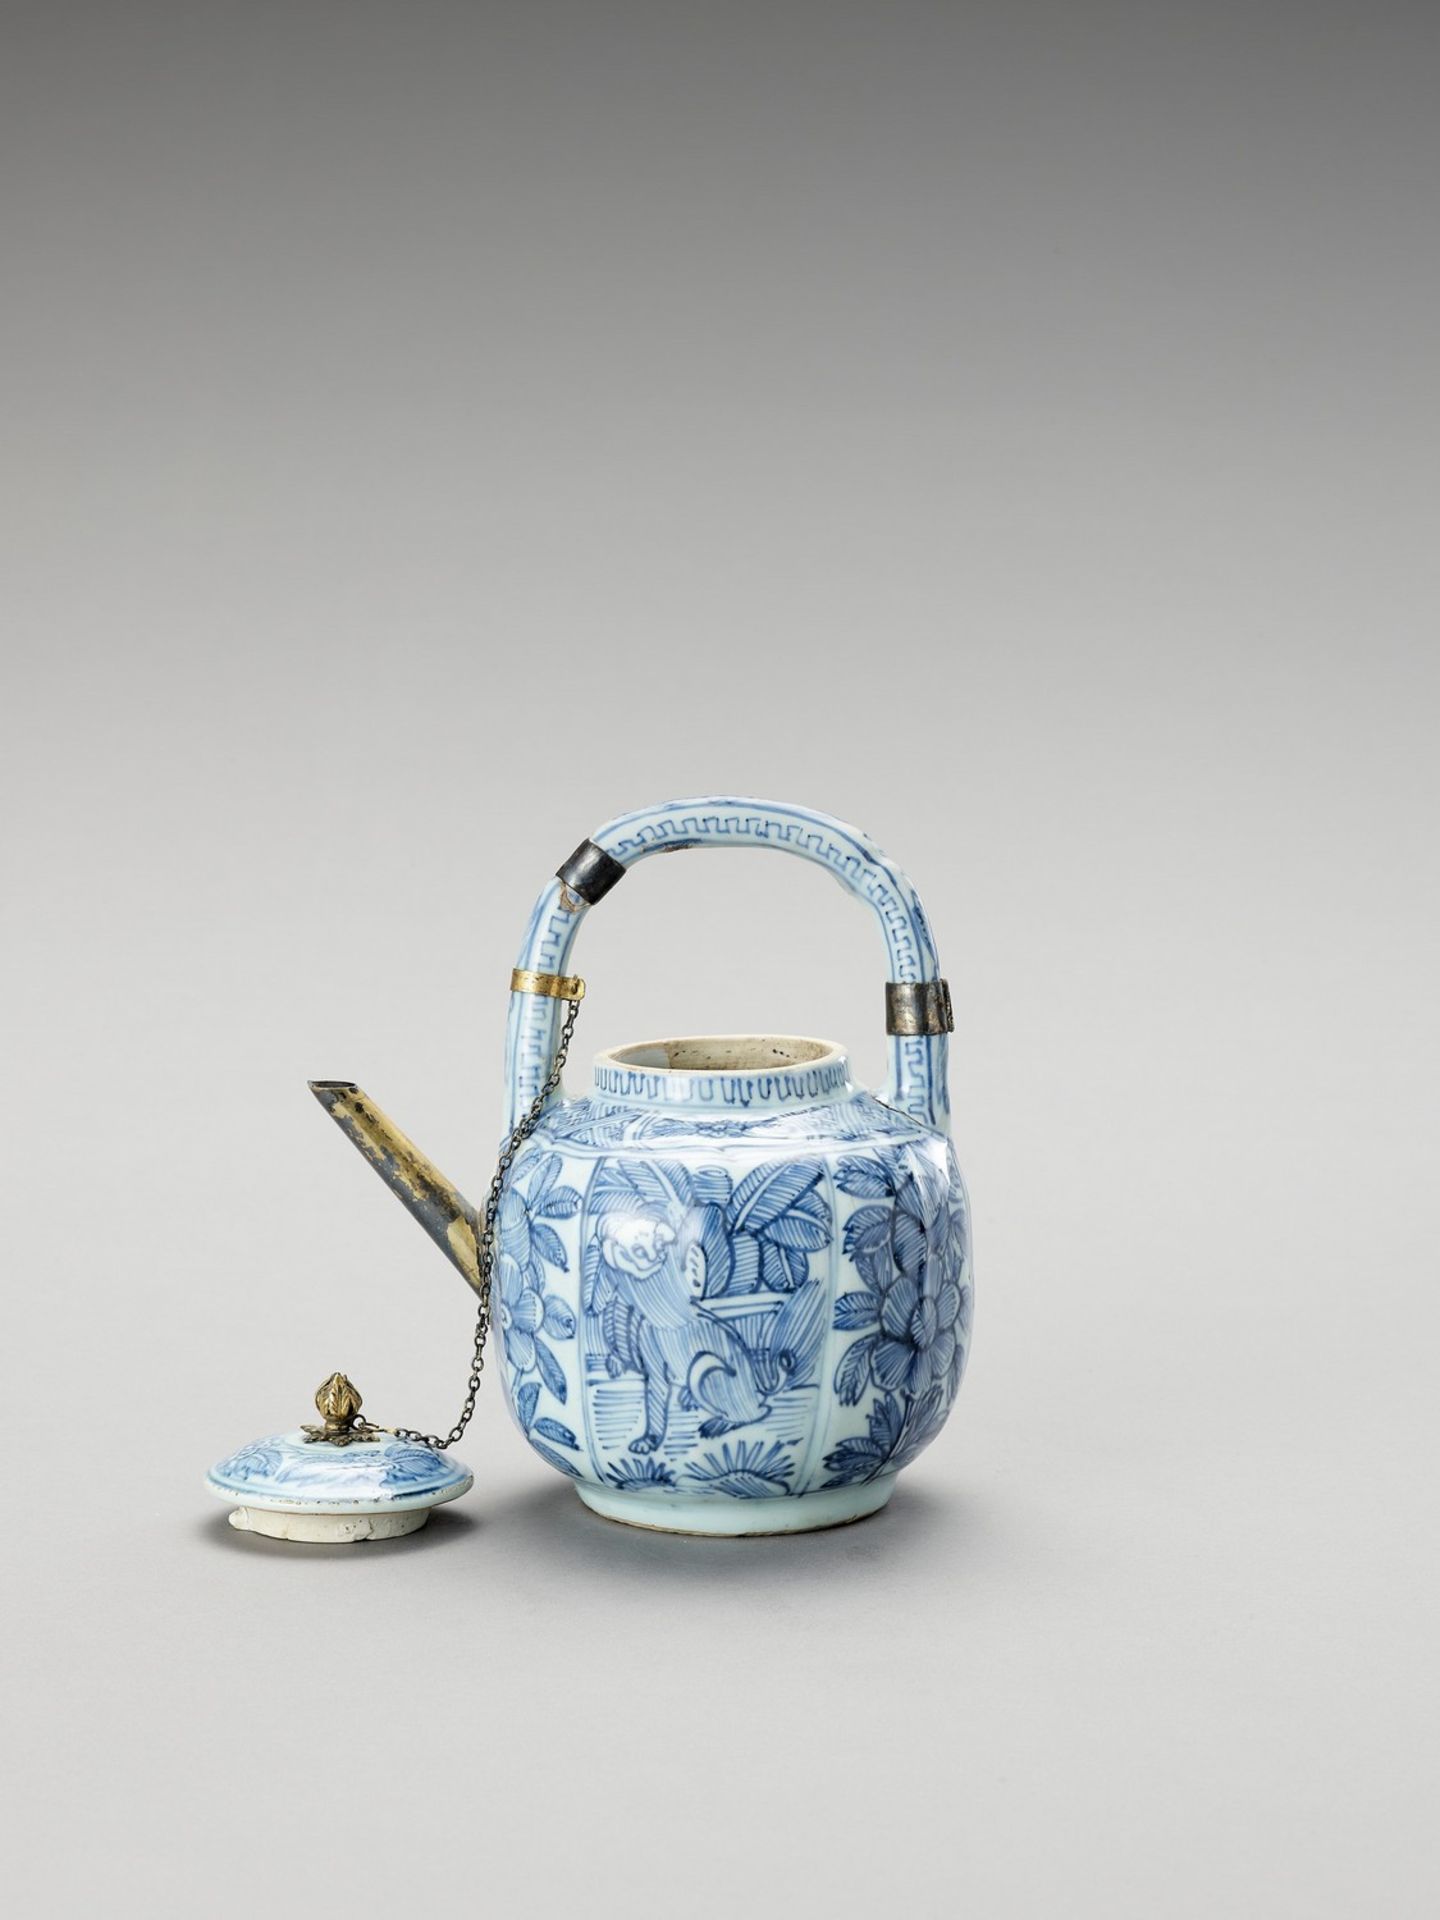 A SILVER-MOUNTED BLUE AND WHITE PORCELAIN TEAPOT - Image 3 of 7